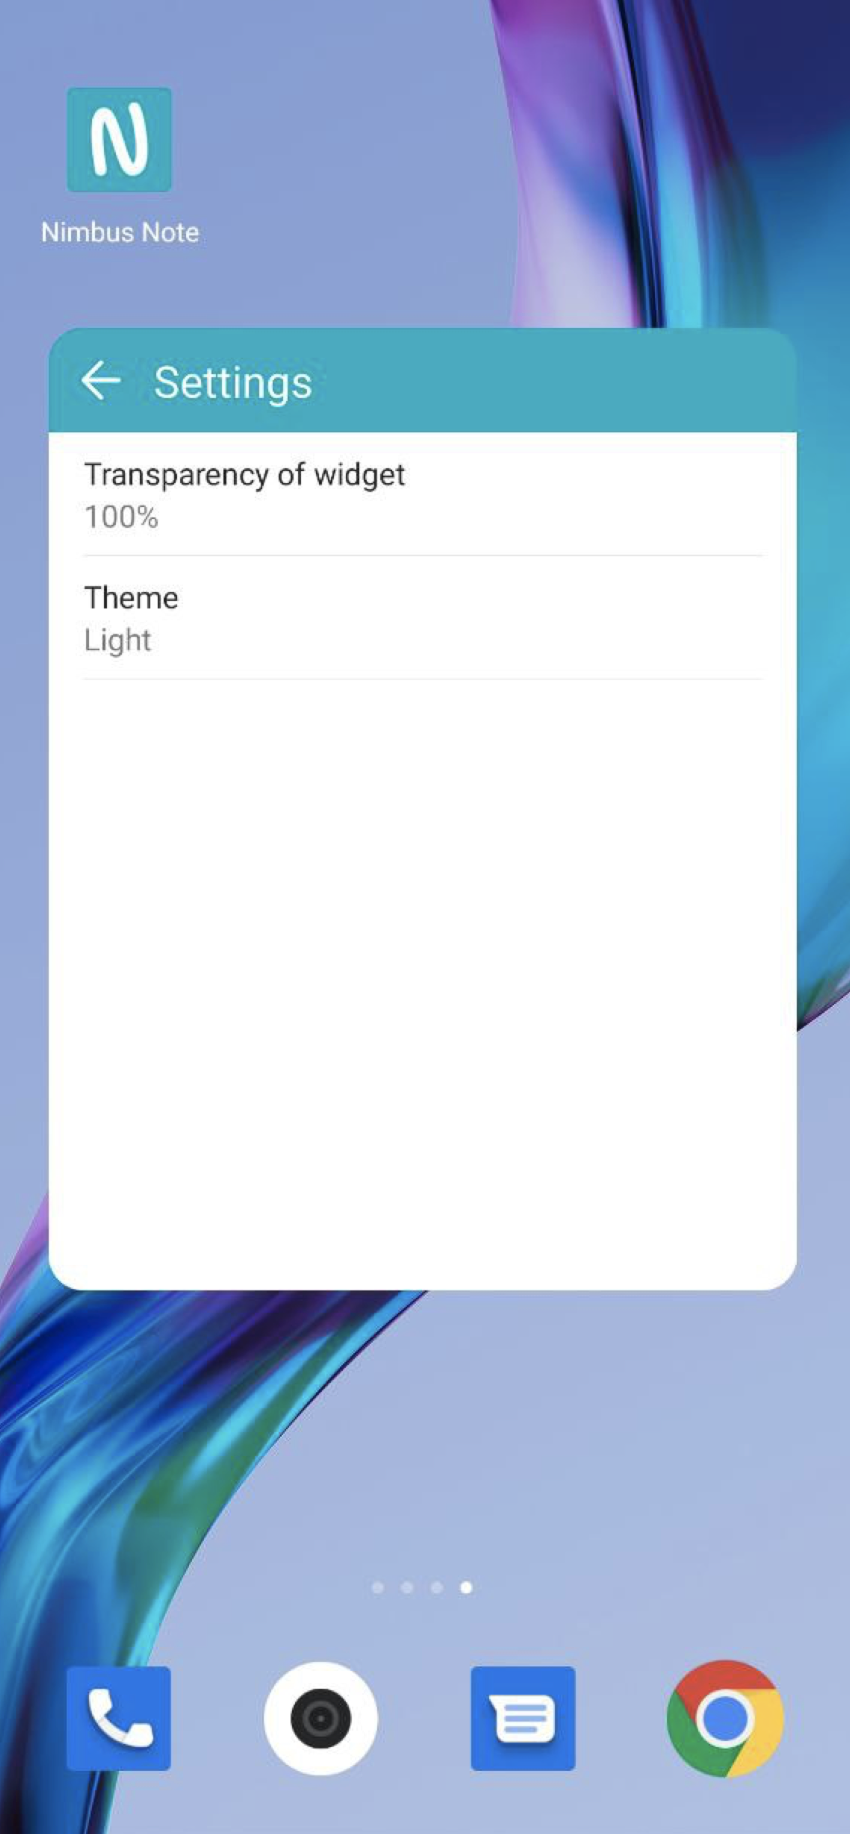 The widget allows to configure which folder notes will be shown, as well as set the transparency and theme of the widget.